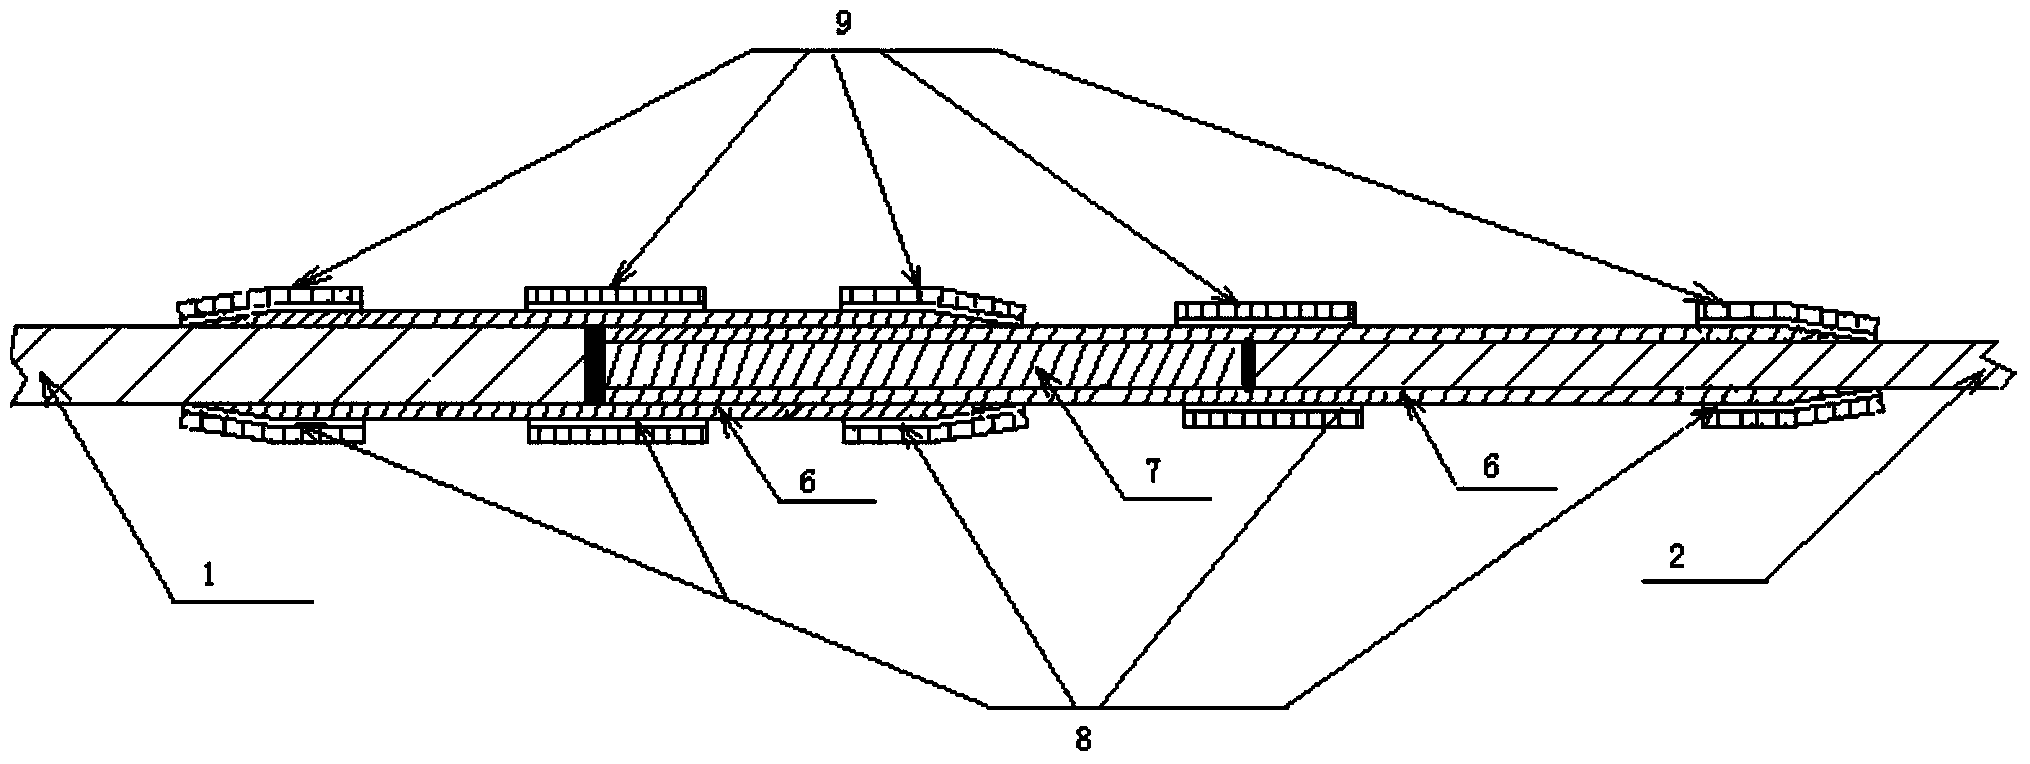 Composite connection method for high-strength variable-diameter steel cable